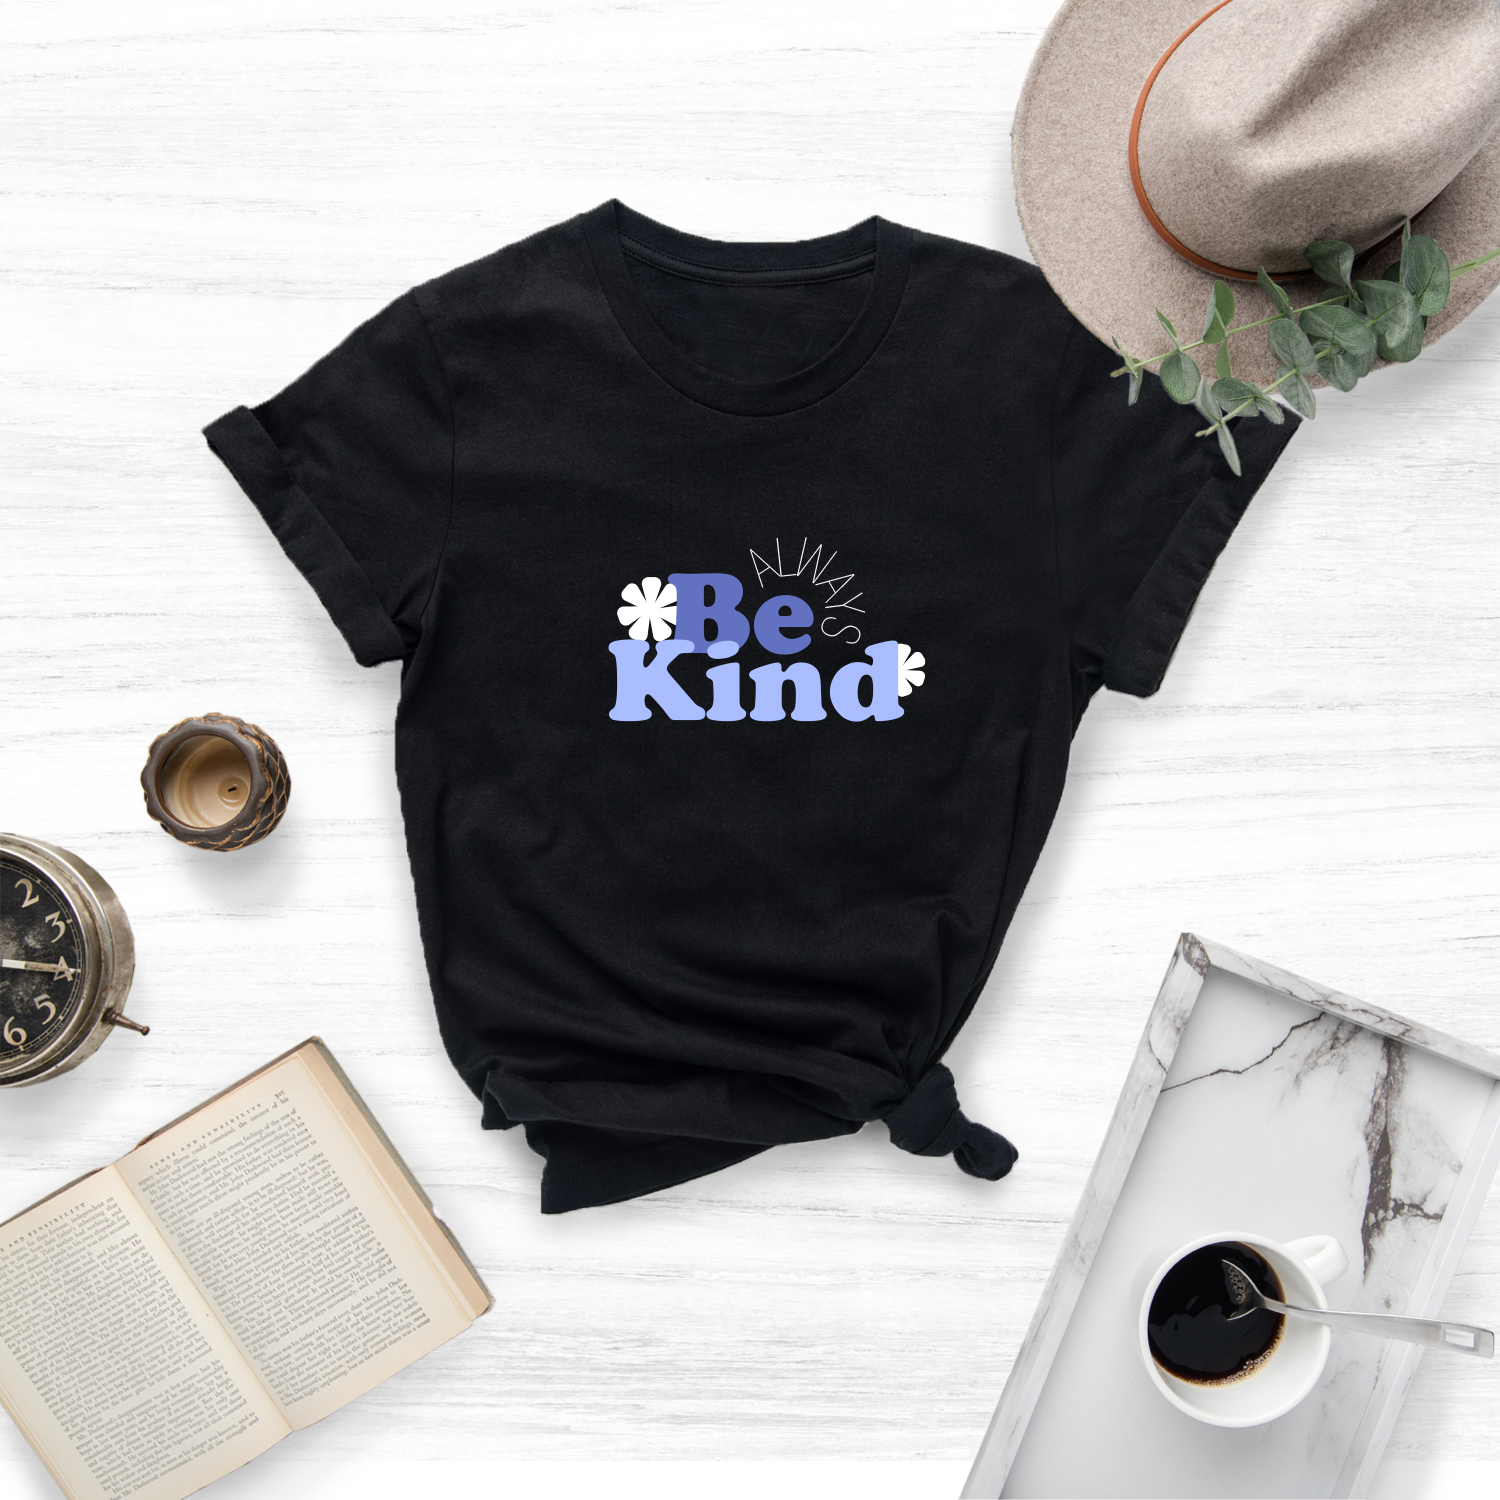 Embrace compassion and make a difference with this unique Kindness Shirt.